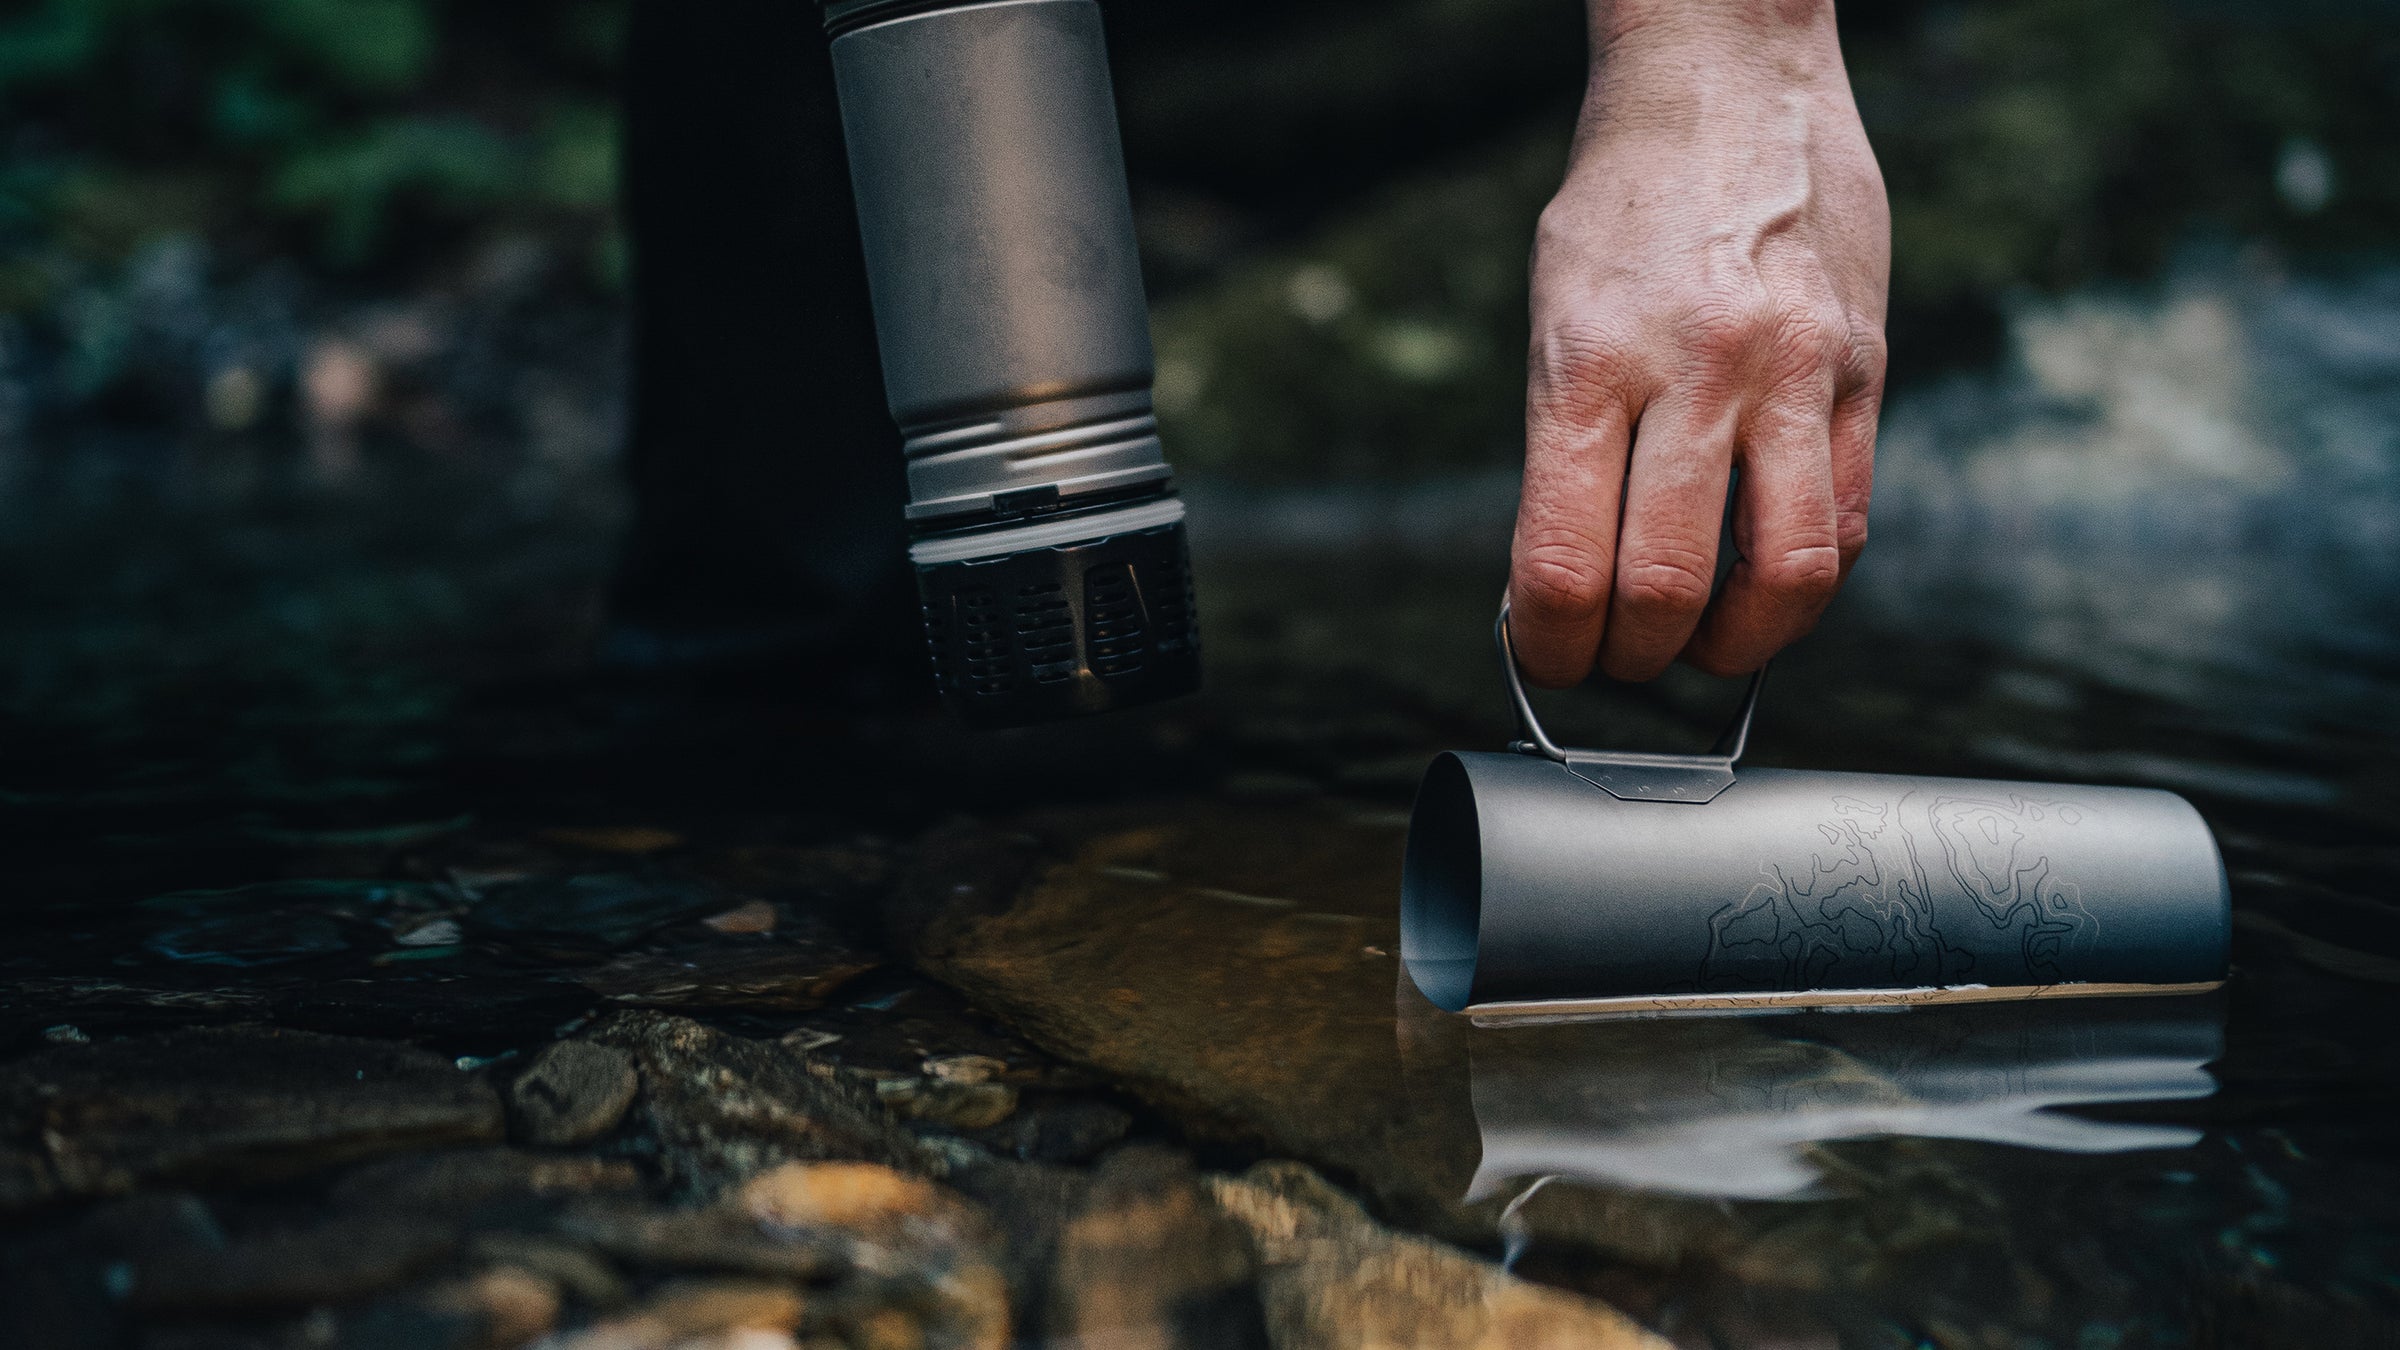 NEW! TITANIUM CAMPWARE TOOLS FOR THE OUTDOORS